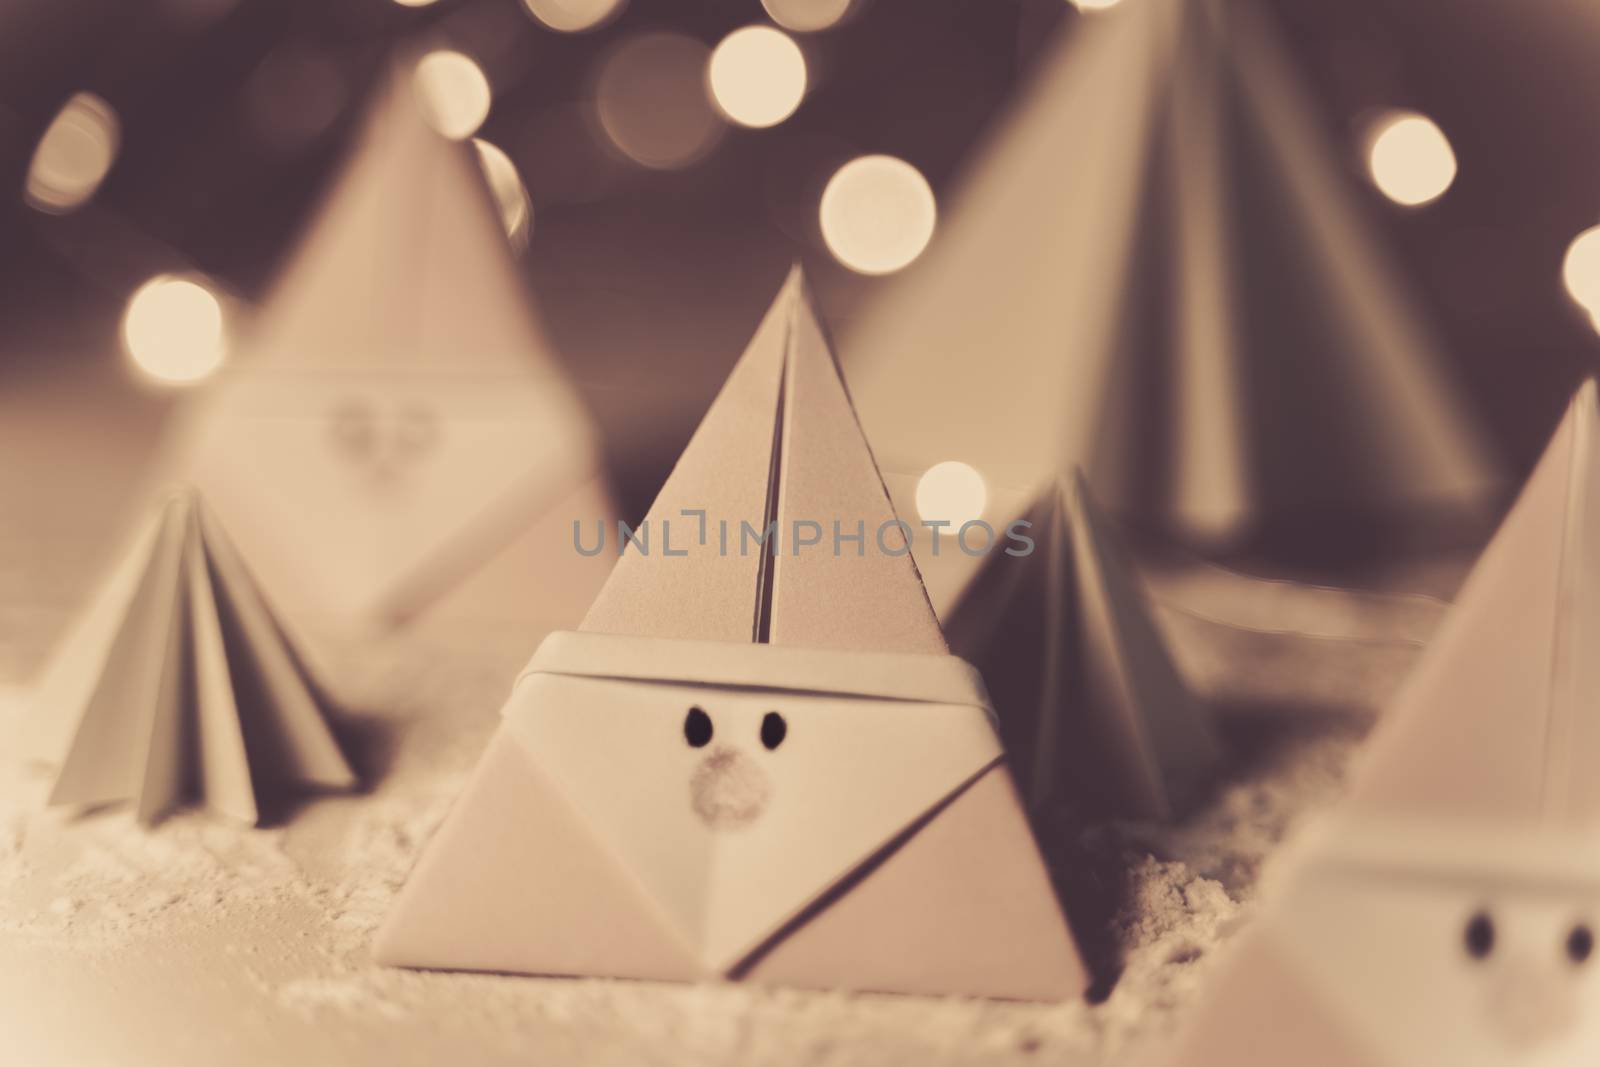 Origami Xmas scene with Santa claus and crhistmas trees in paper craft in sepia tone by tanaonte